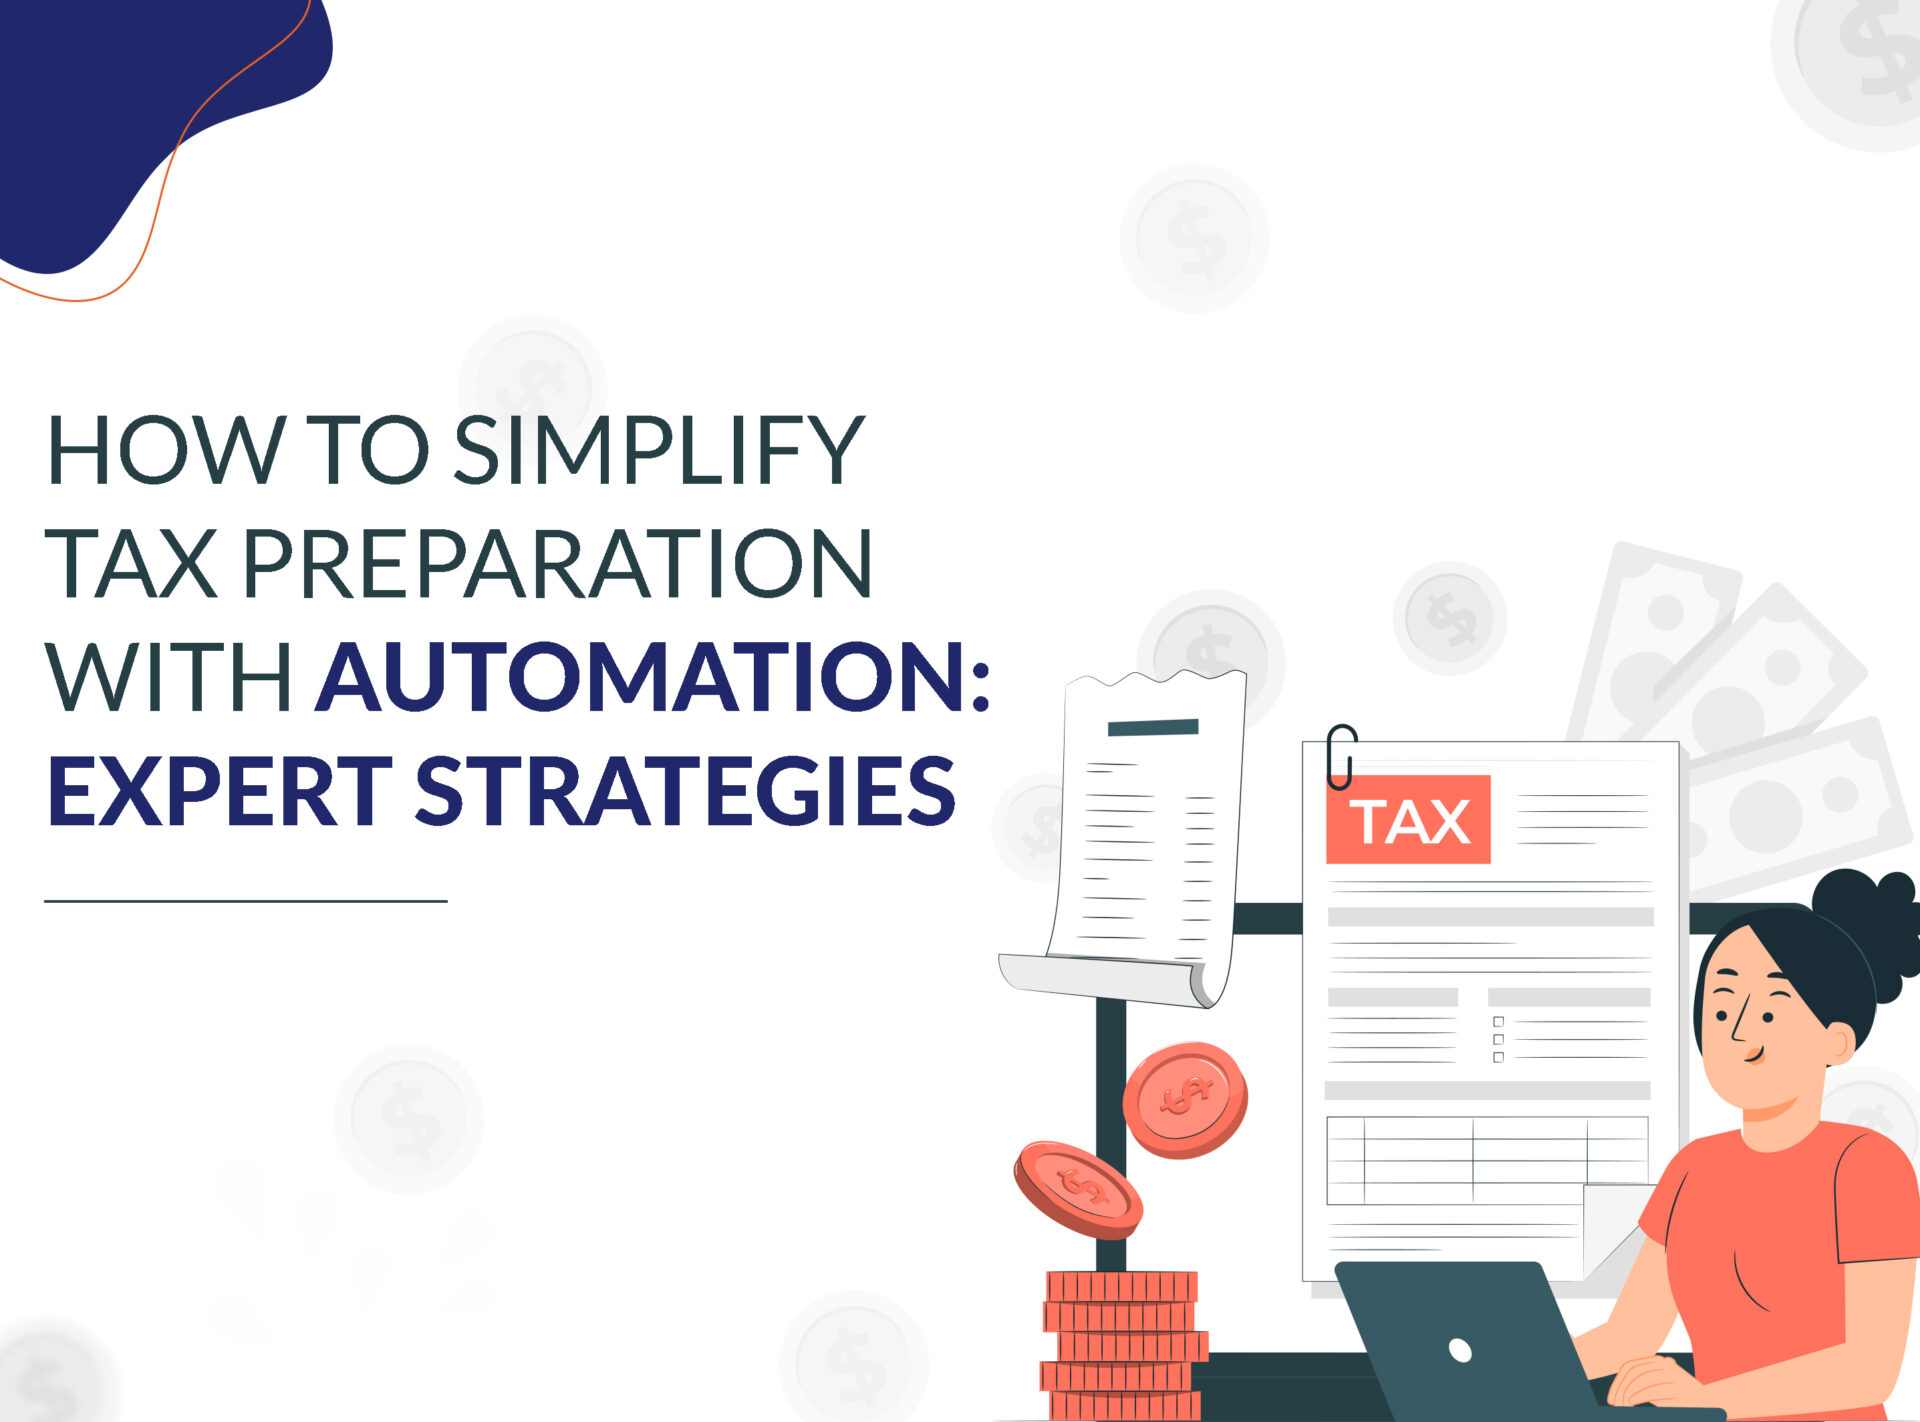 How to Simplify Tax Preparation with Automation: Expert Strategies